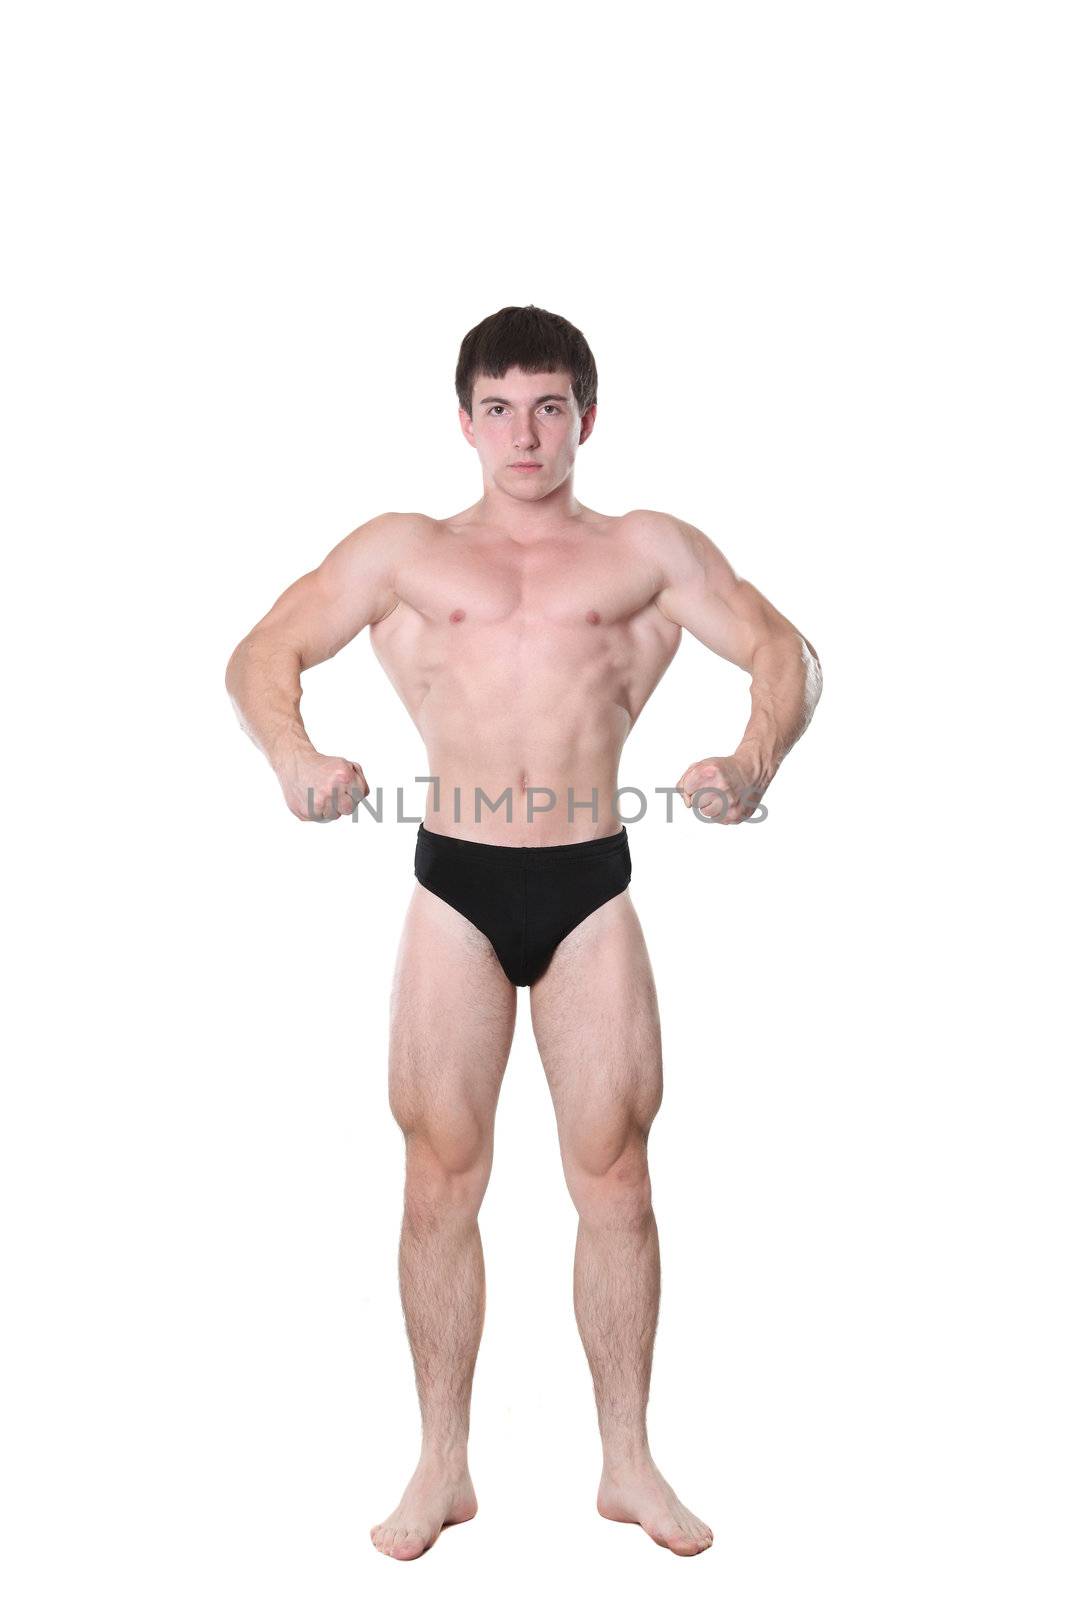 The young athlete the man poses on a white background